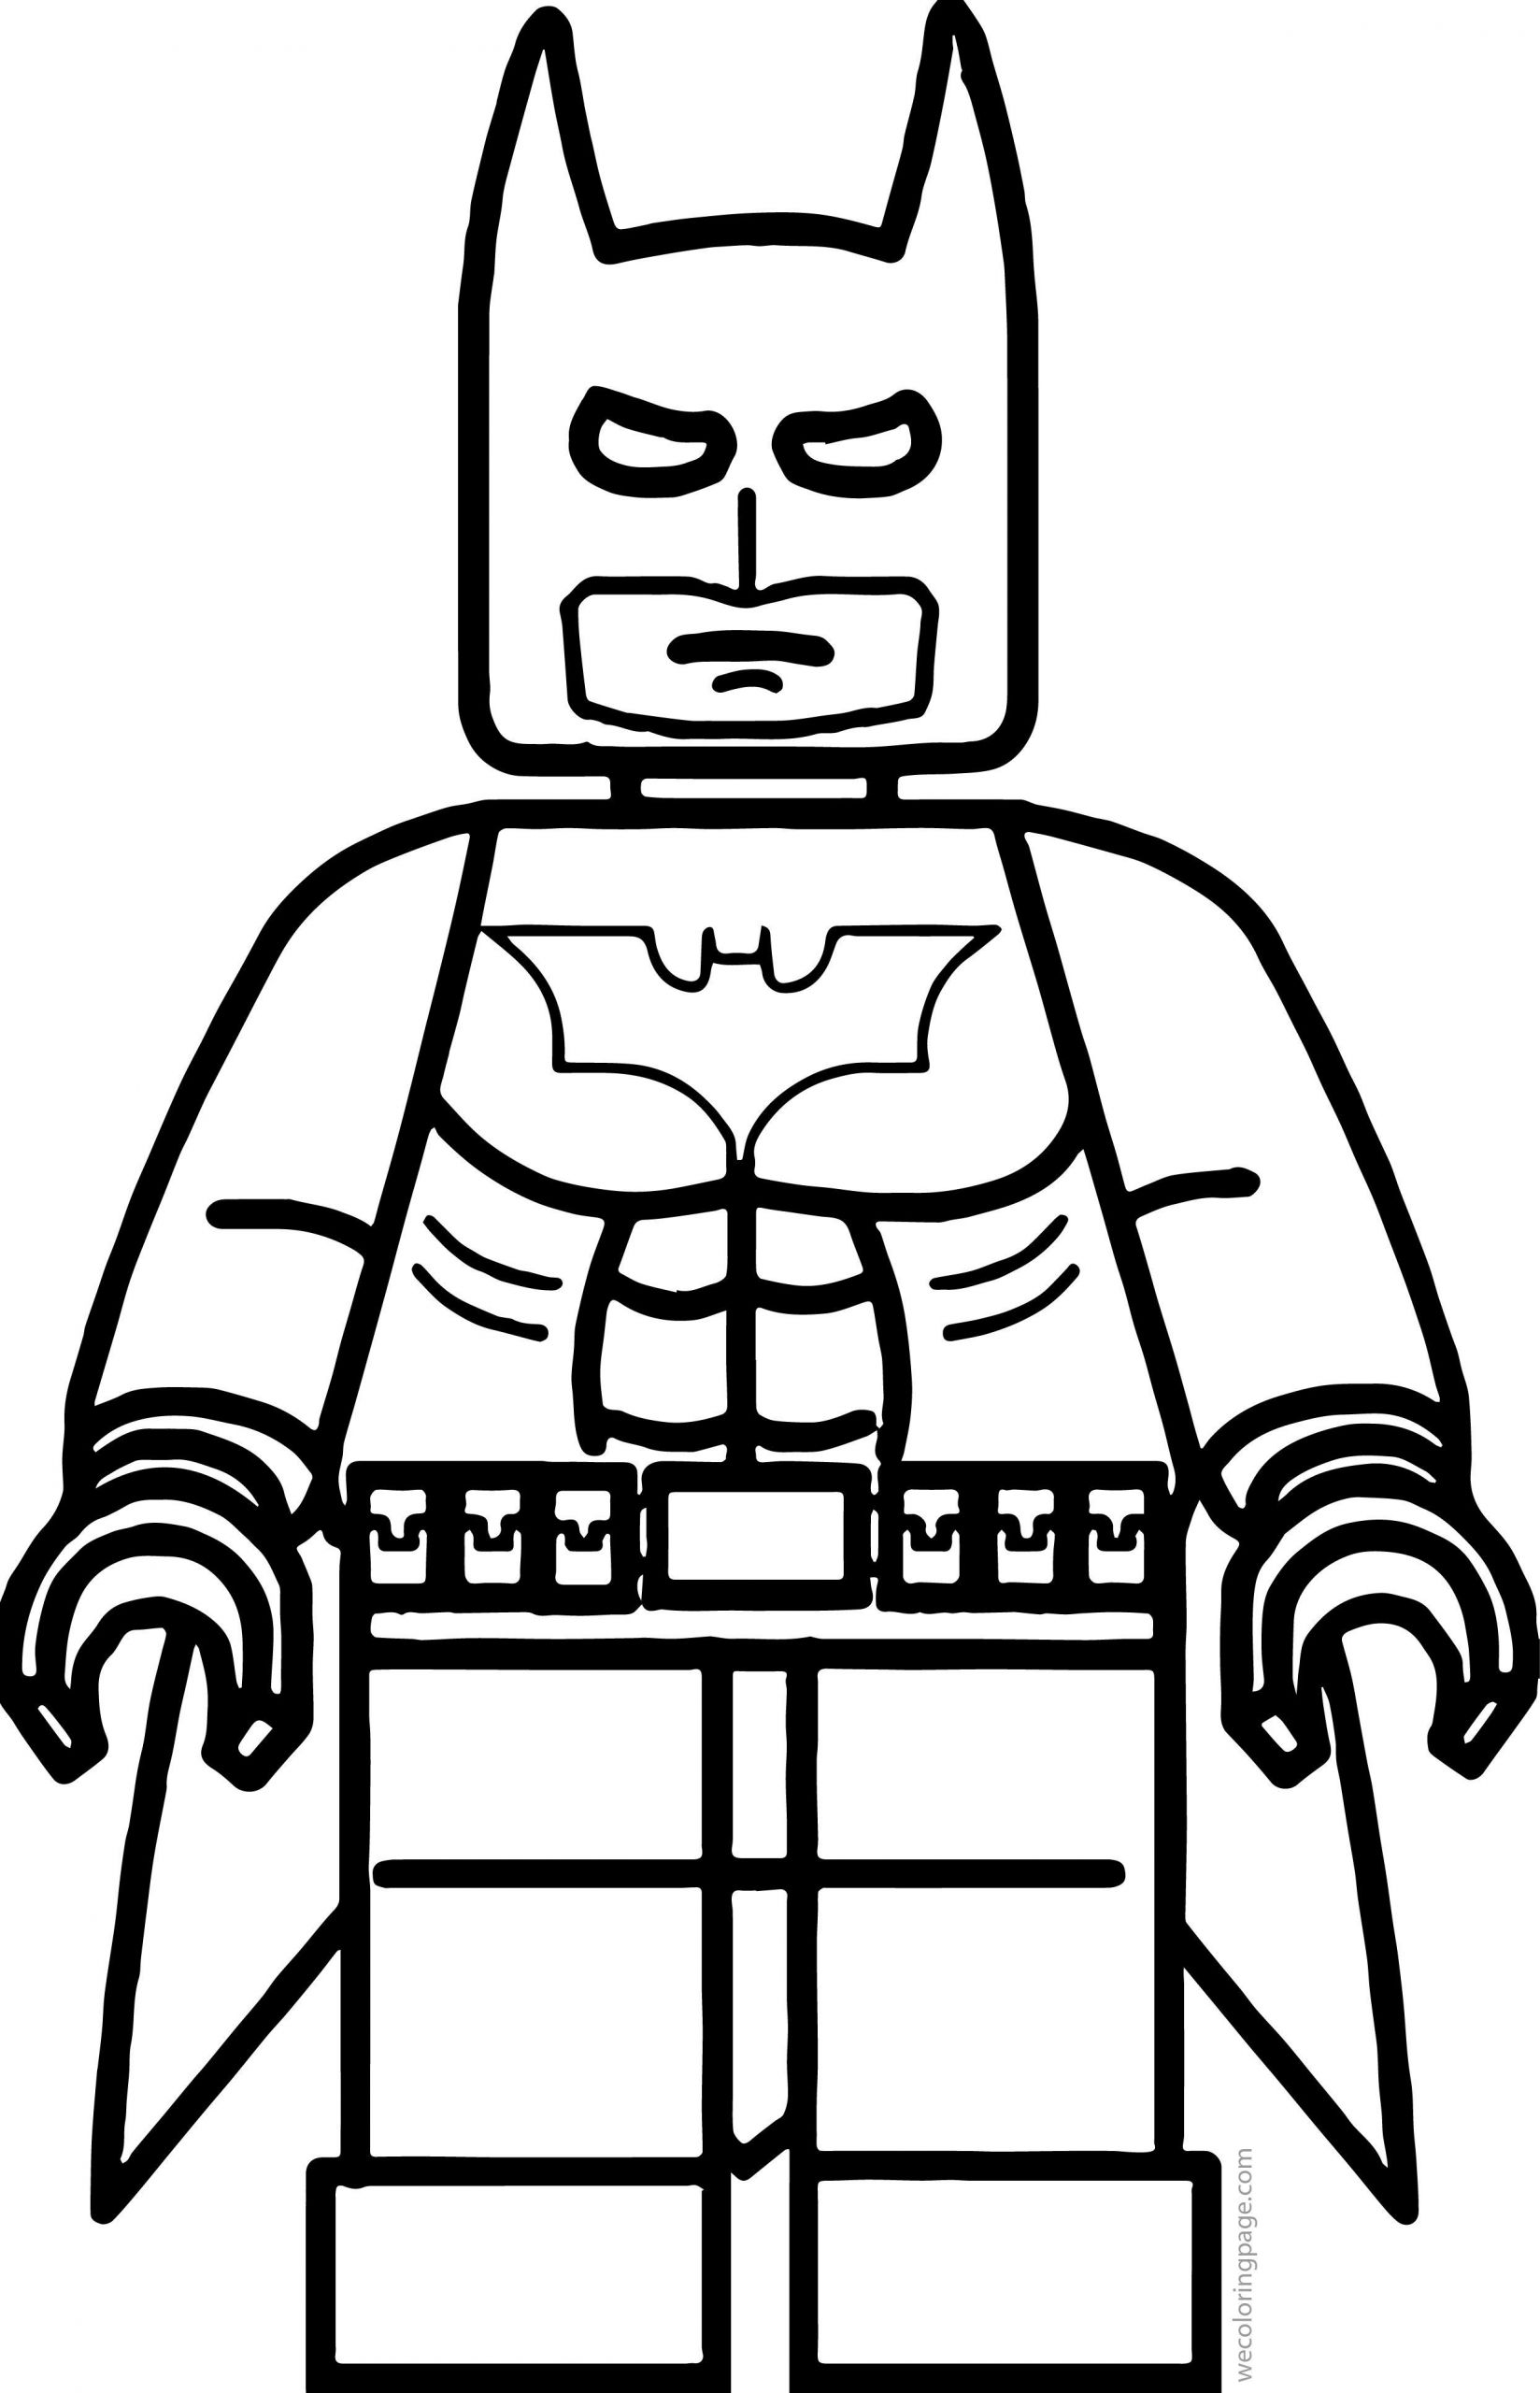 Coloring Pages For Boys Lego
 Lego Batman Coloring Page